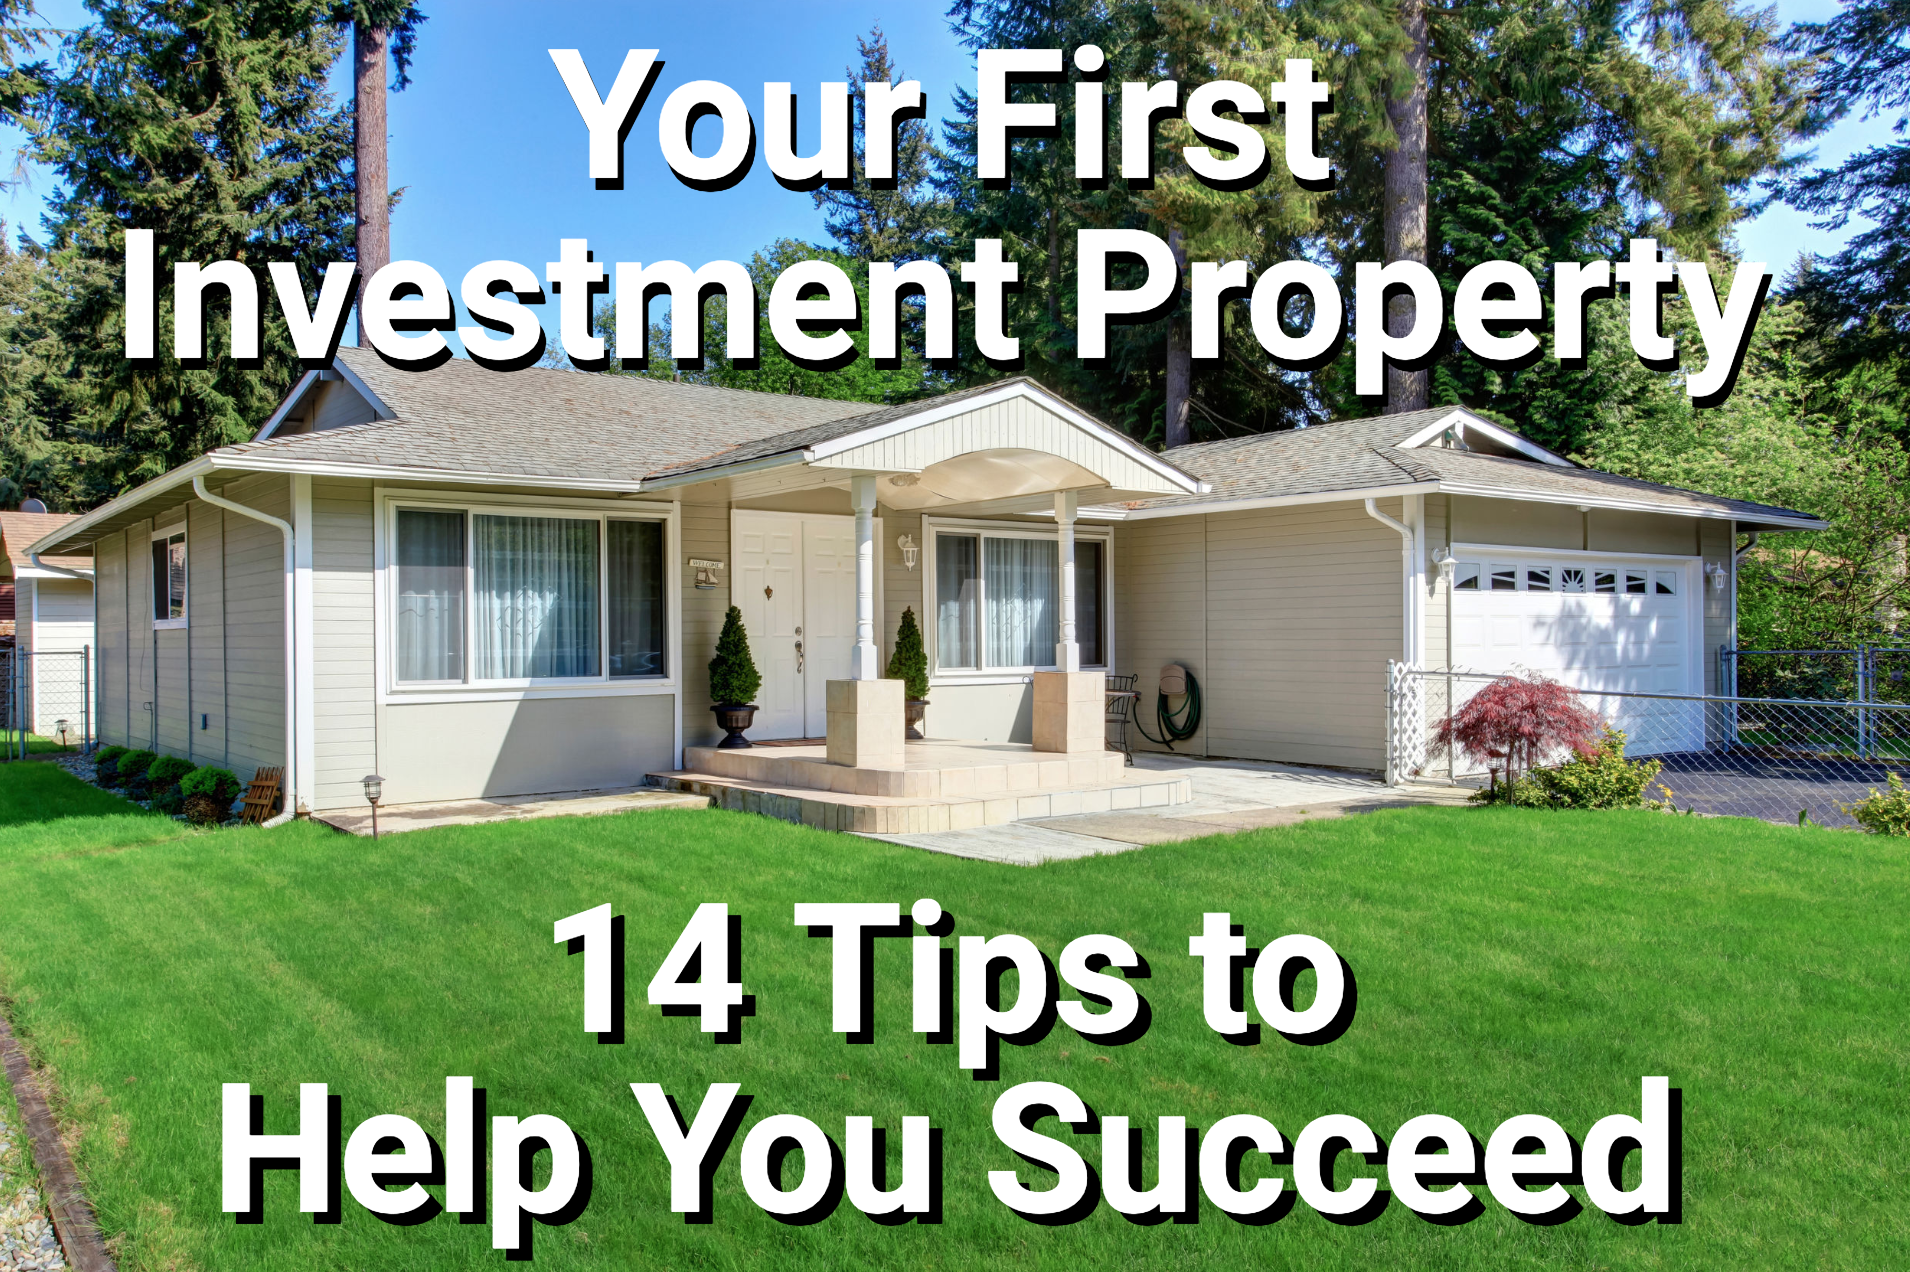 Small home as a first investment property